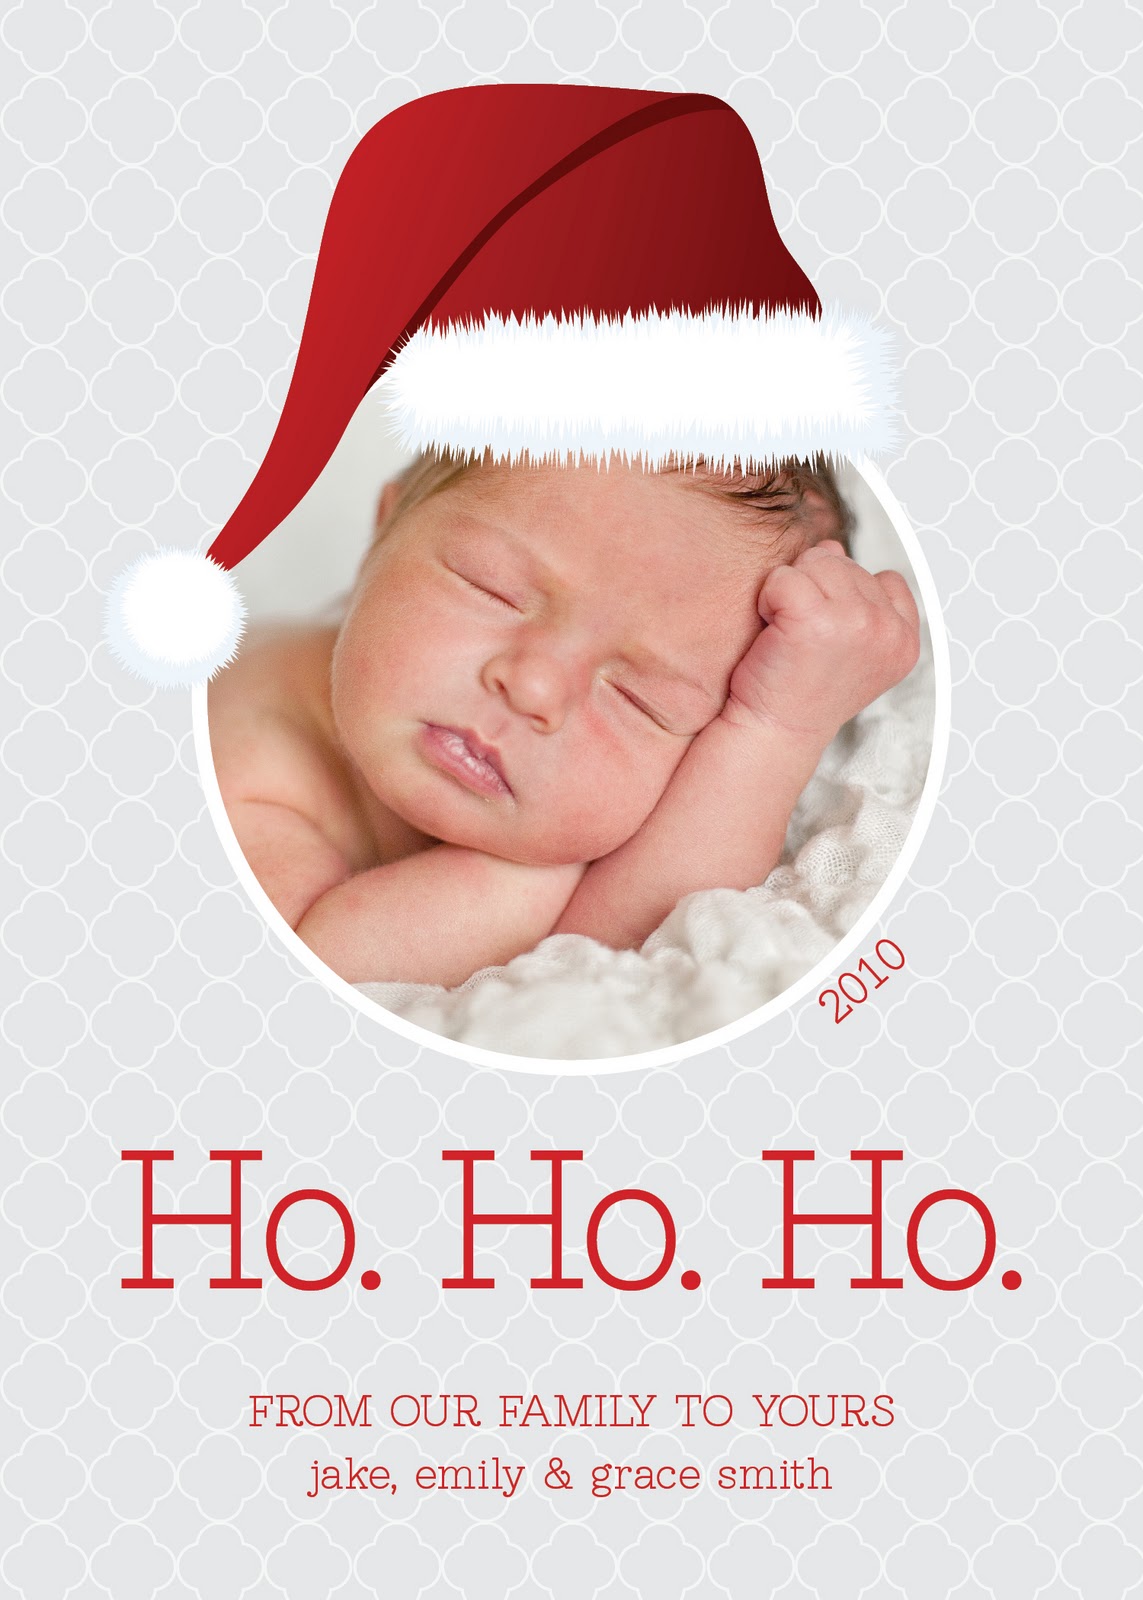 BAILEY DOEHLER DESIGNS: 2010 HOLIDAY CARDS NOW AVAILABLE